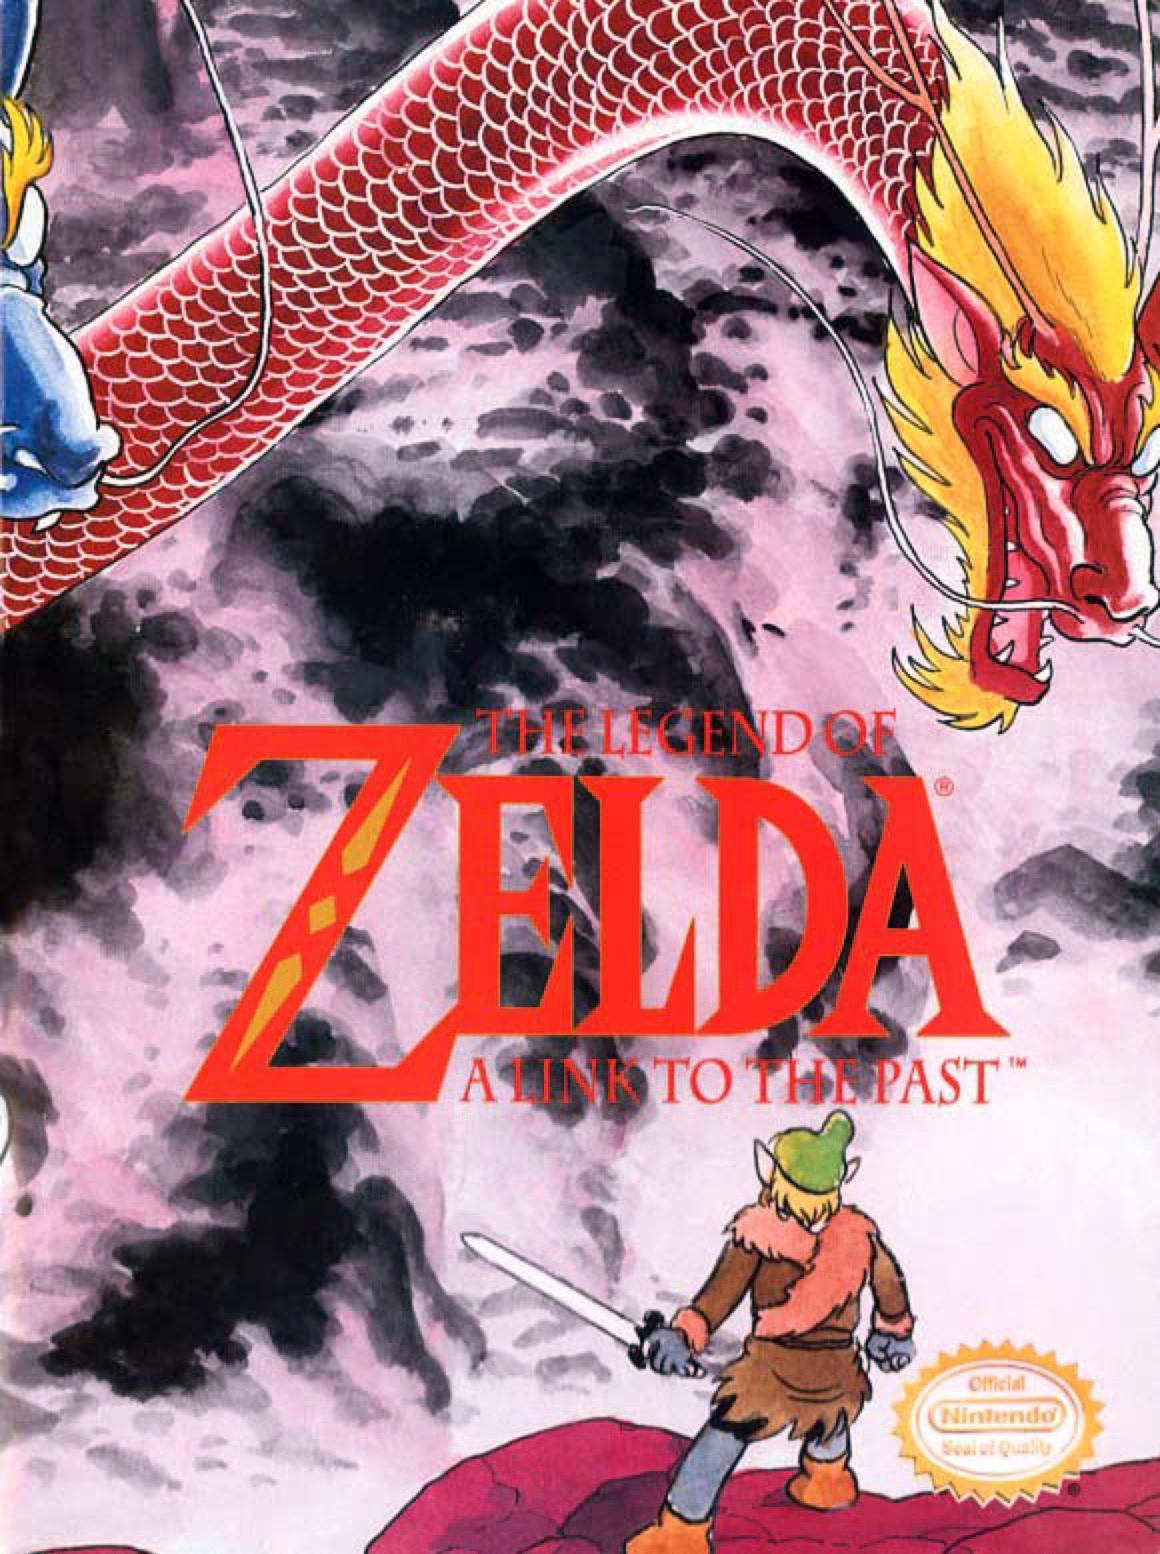 spaceauddity:
“ animenostalgia:
“ News! - Viz announced that they will be releasing Shotaro Ishinomori’s Link To The Past manga that originally ran in Nintendo Power in the 90s! The manga will be collected into 1 volume, to be released in May. This...